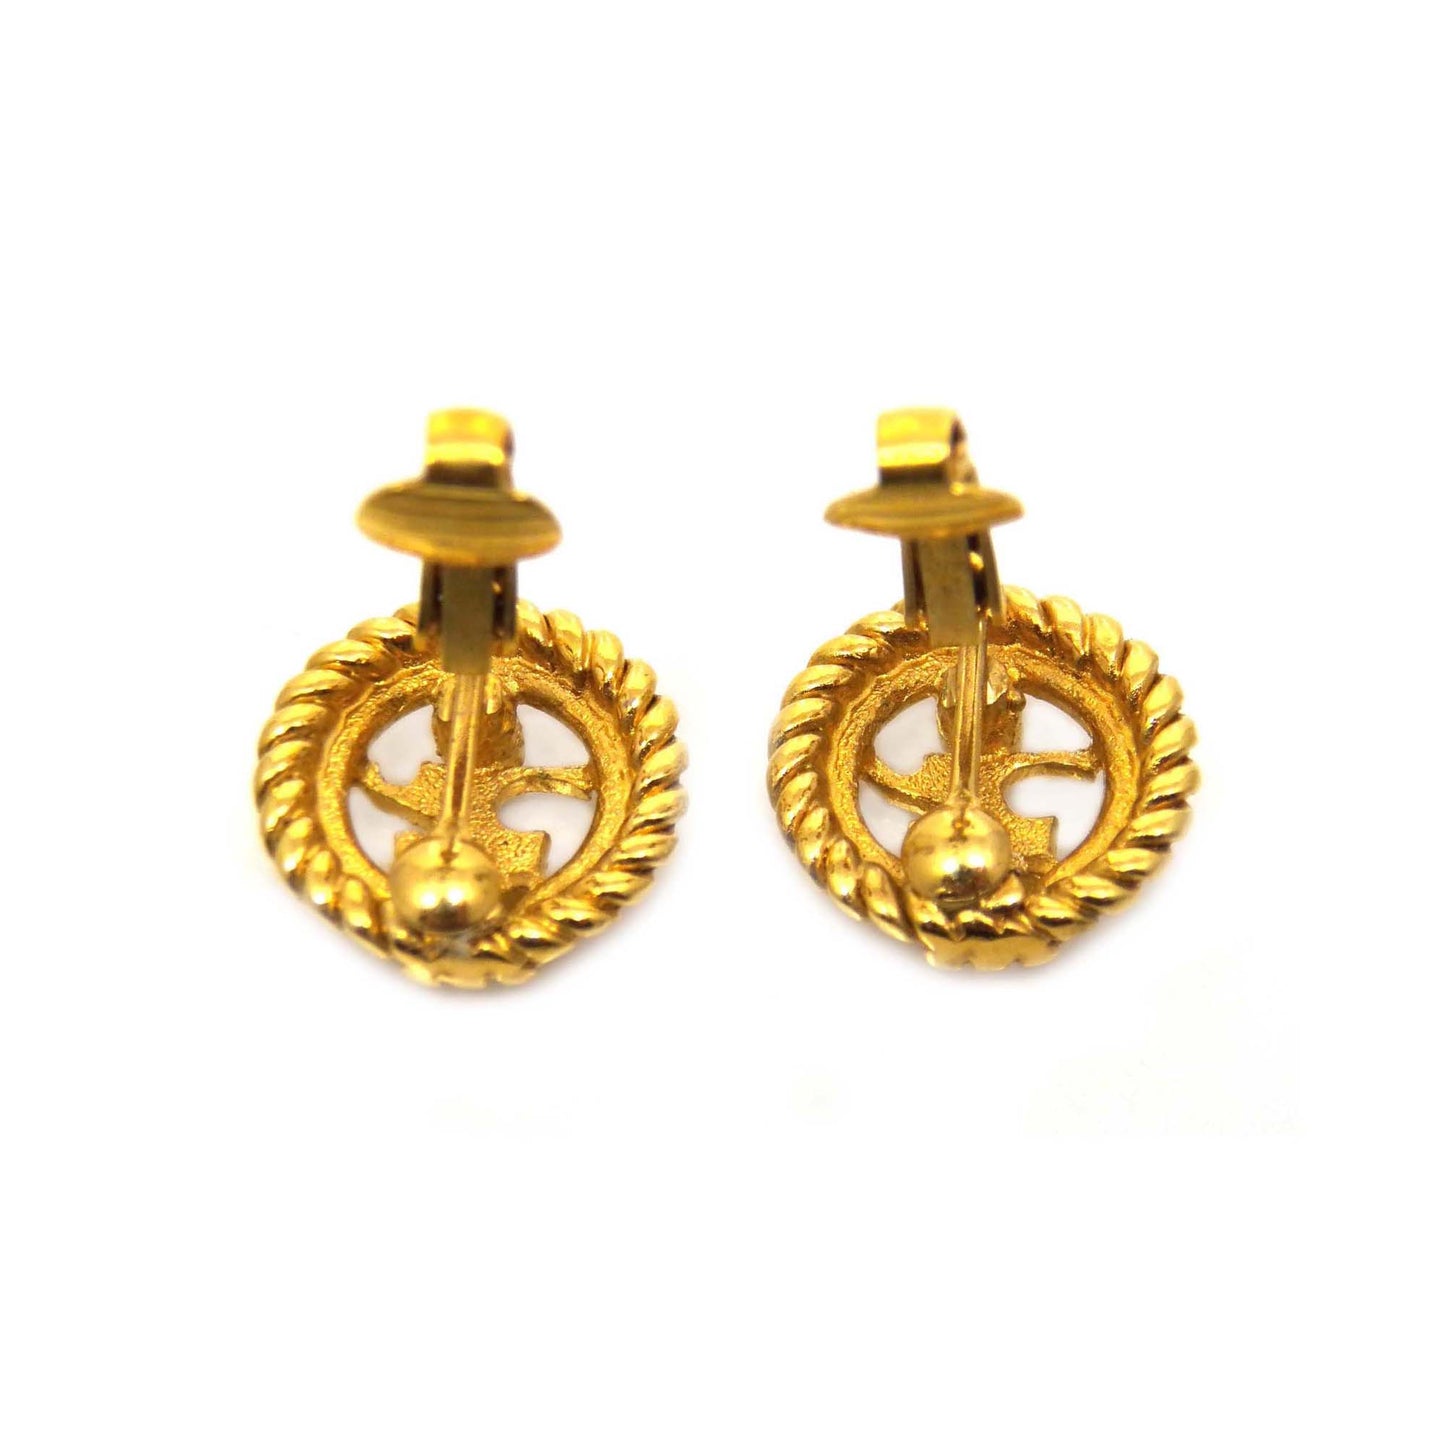 Andre Courreges Logo Clip On Earrings, French Couture Vintage Designer Jewelry